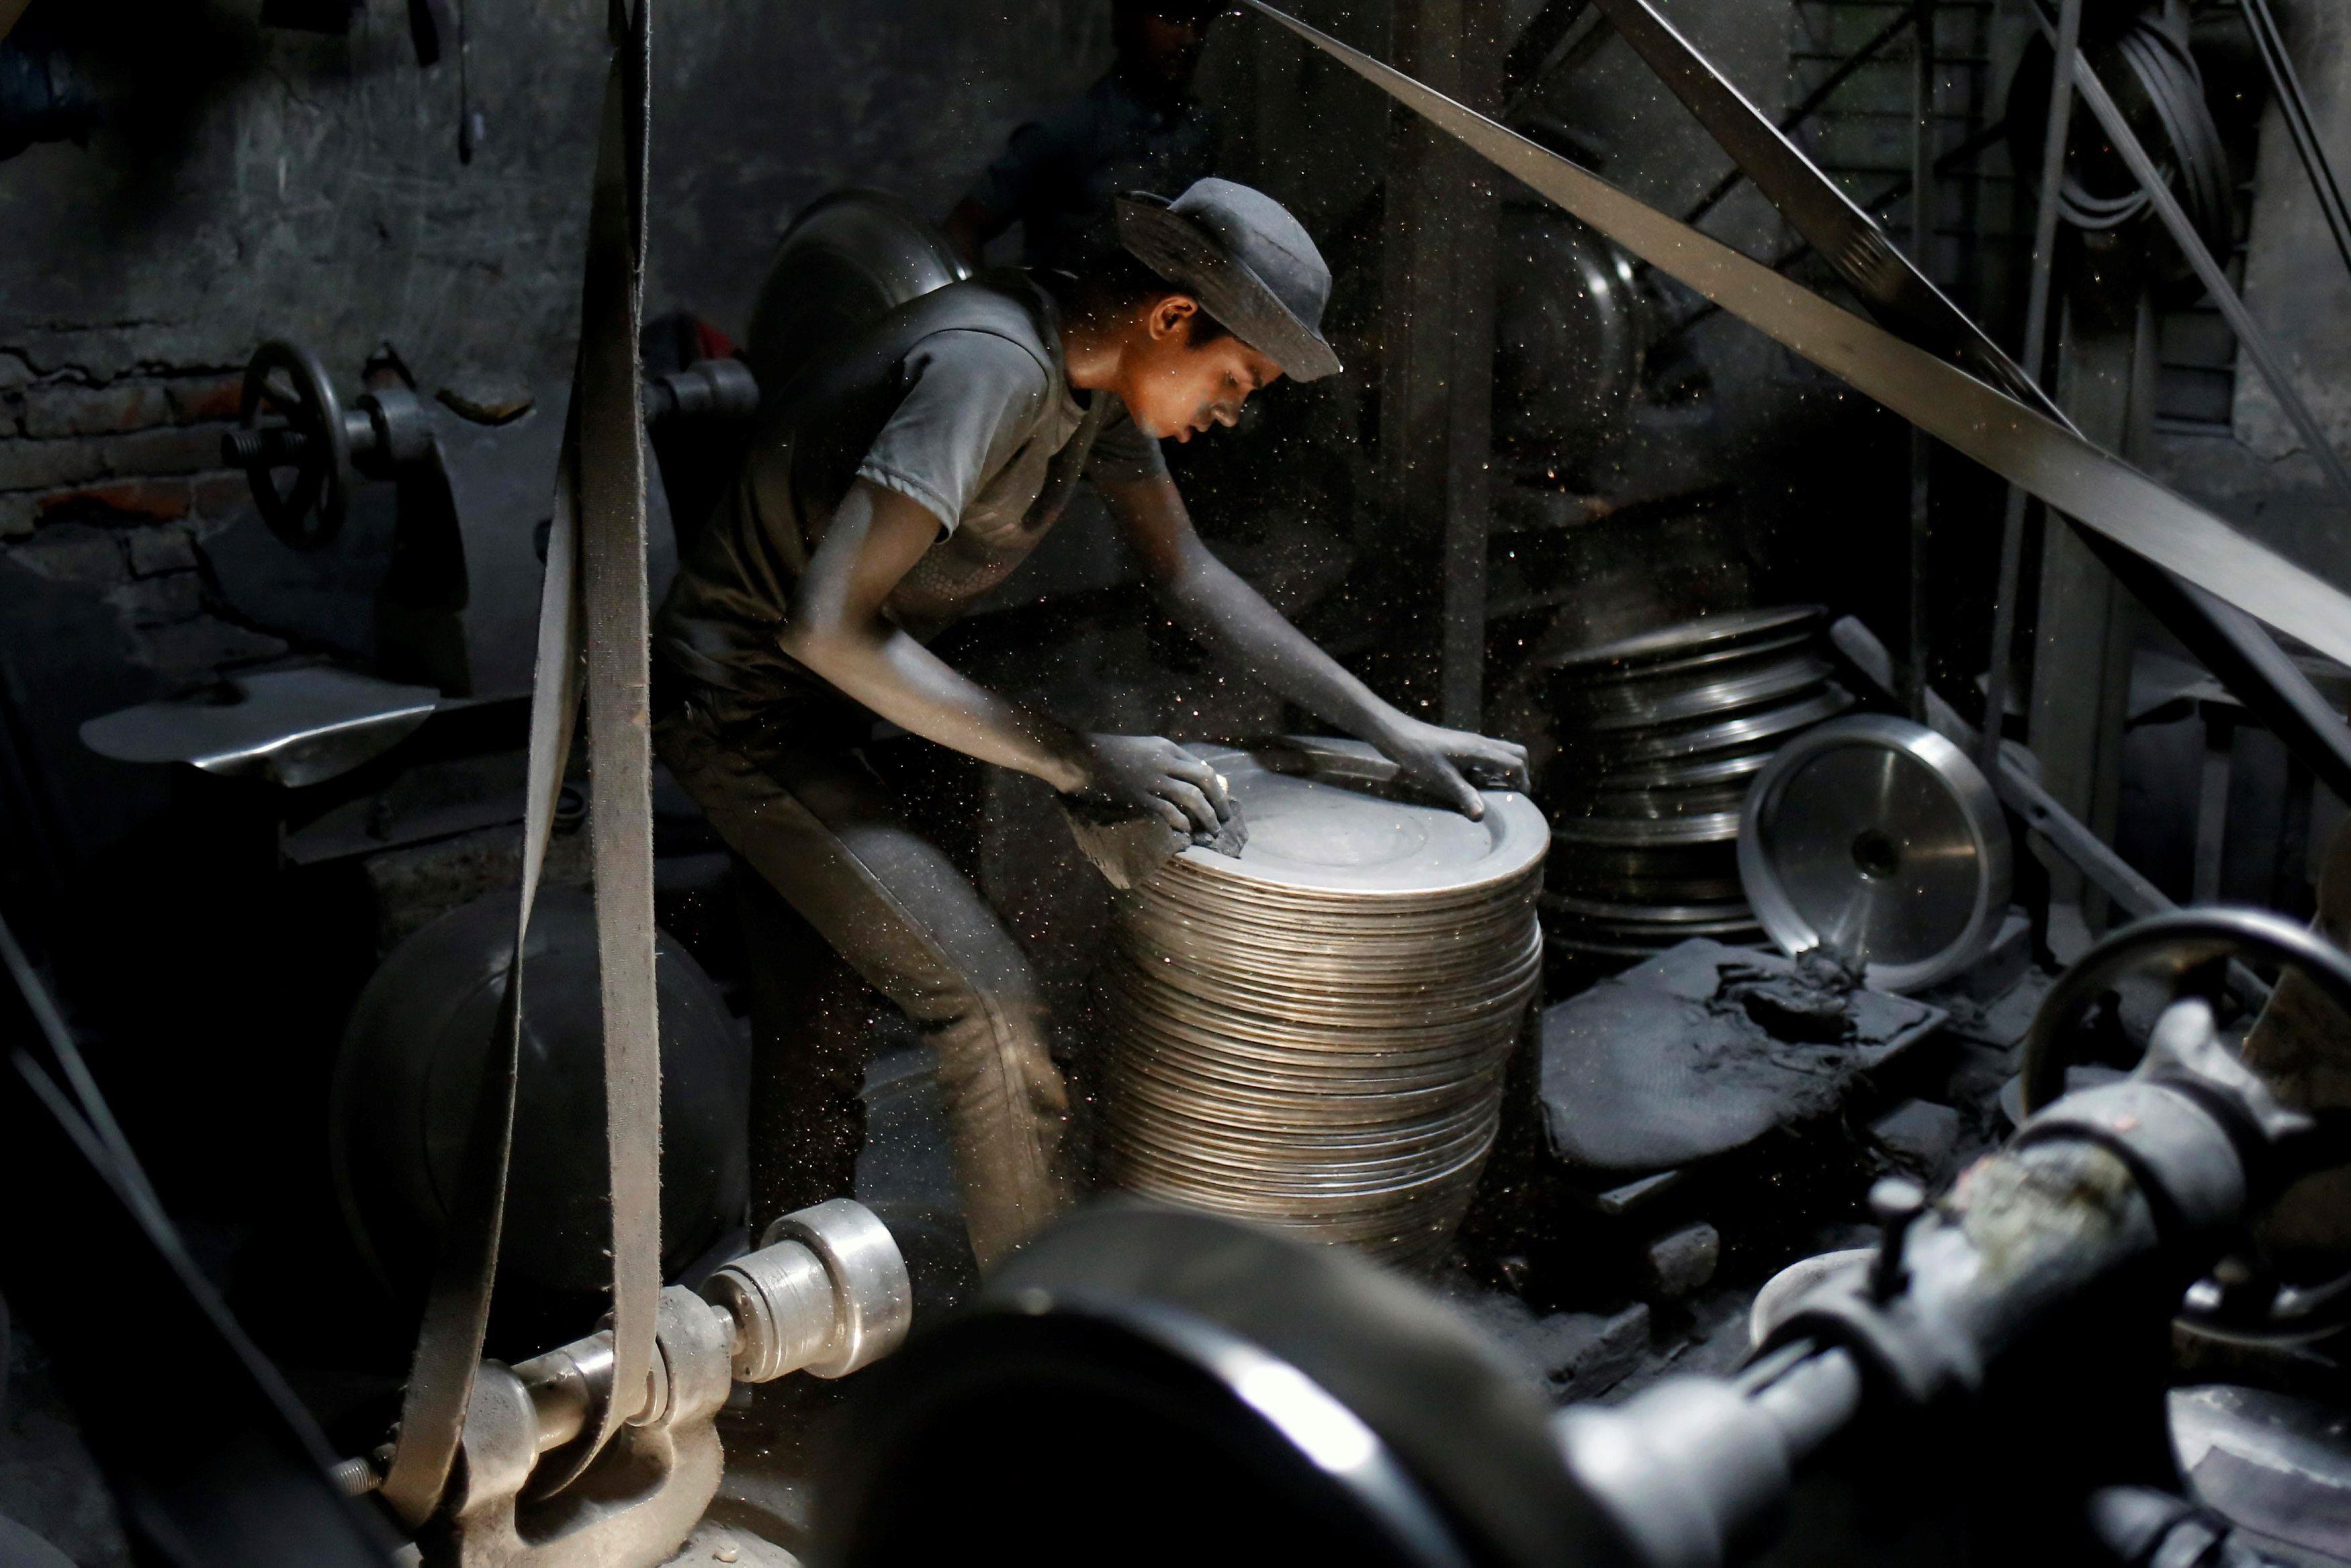 A boy works at a aluminum utensils factory in Dhaka